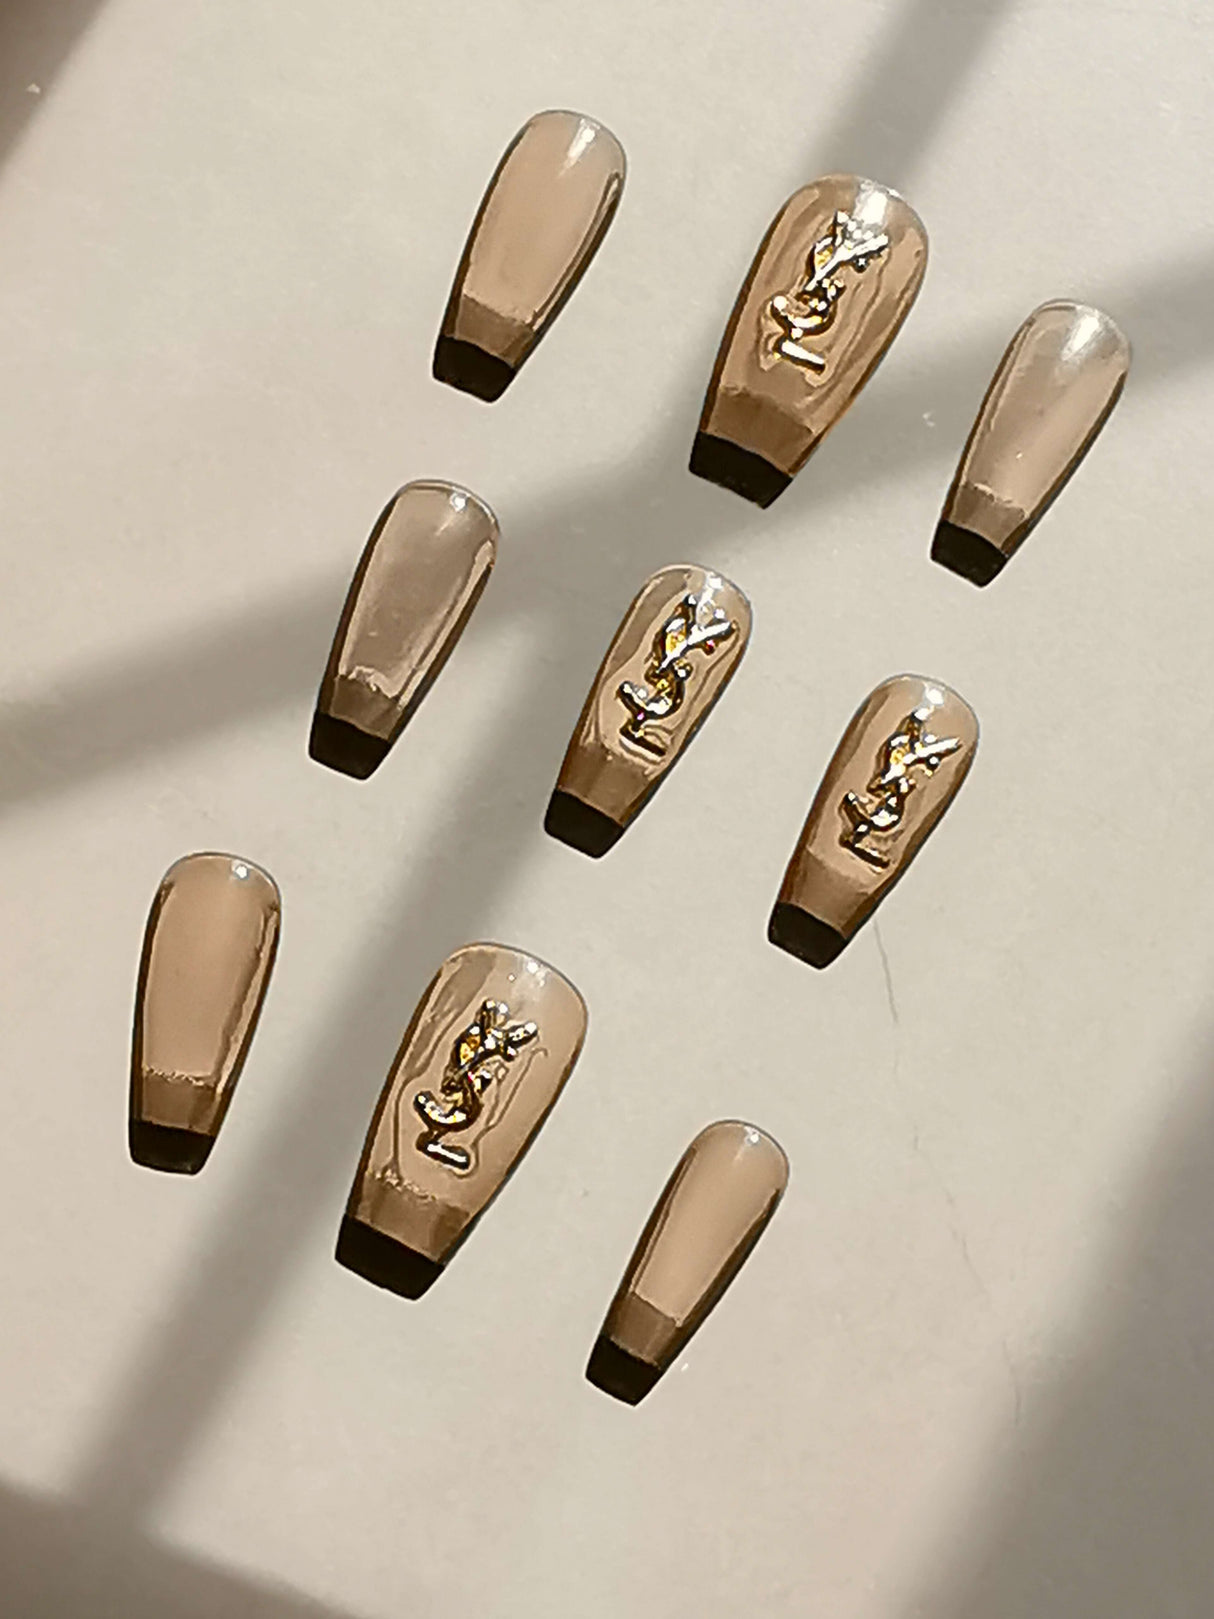 These press-on nails are  for cute purposes, with an trendy gold design for a formal or elegant setting. Varying sizes allow for customization.